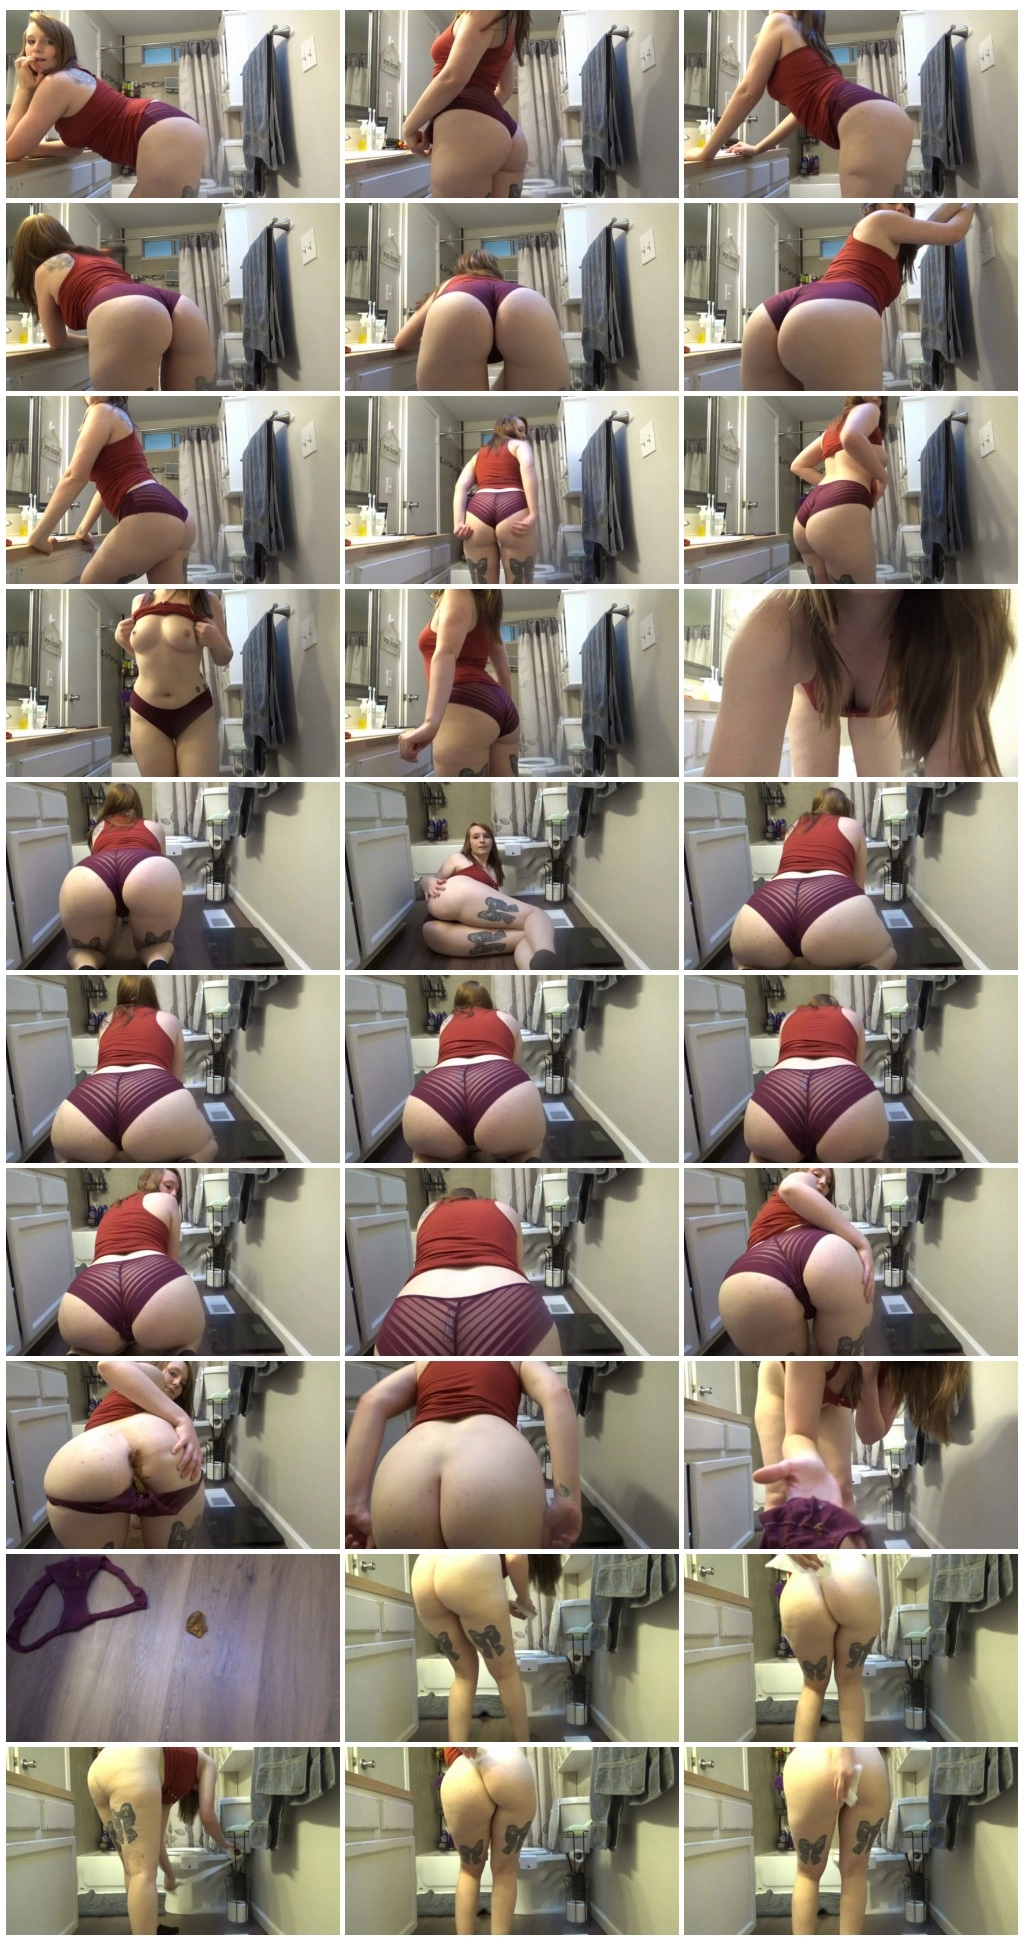 SexyScatForYou - Ass Worship Panty Poop [Scat solo, shit, defecation, Masturbation, Panty pooping, Big Shit,Shitty Ass]